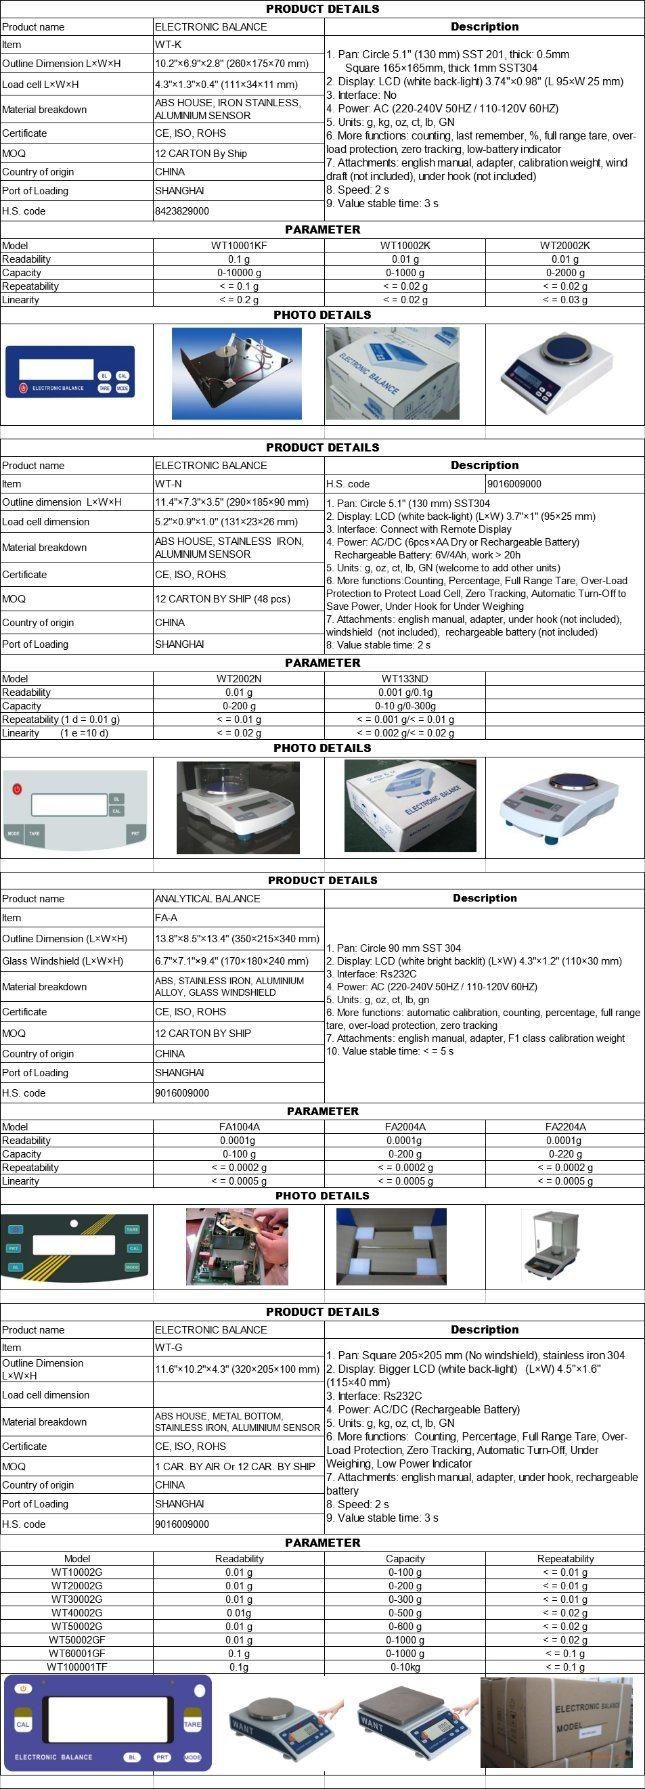 0.001g Accuracy and 110-220 V (AC) Power Supply China Low Price Weighing Scales